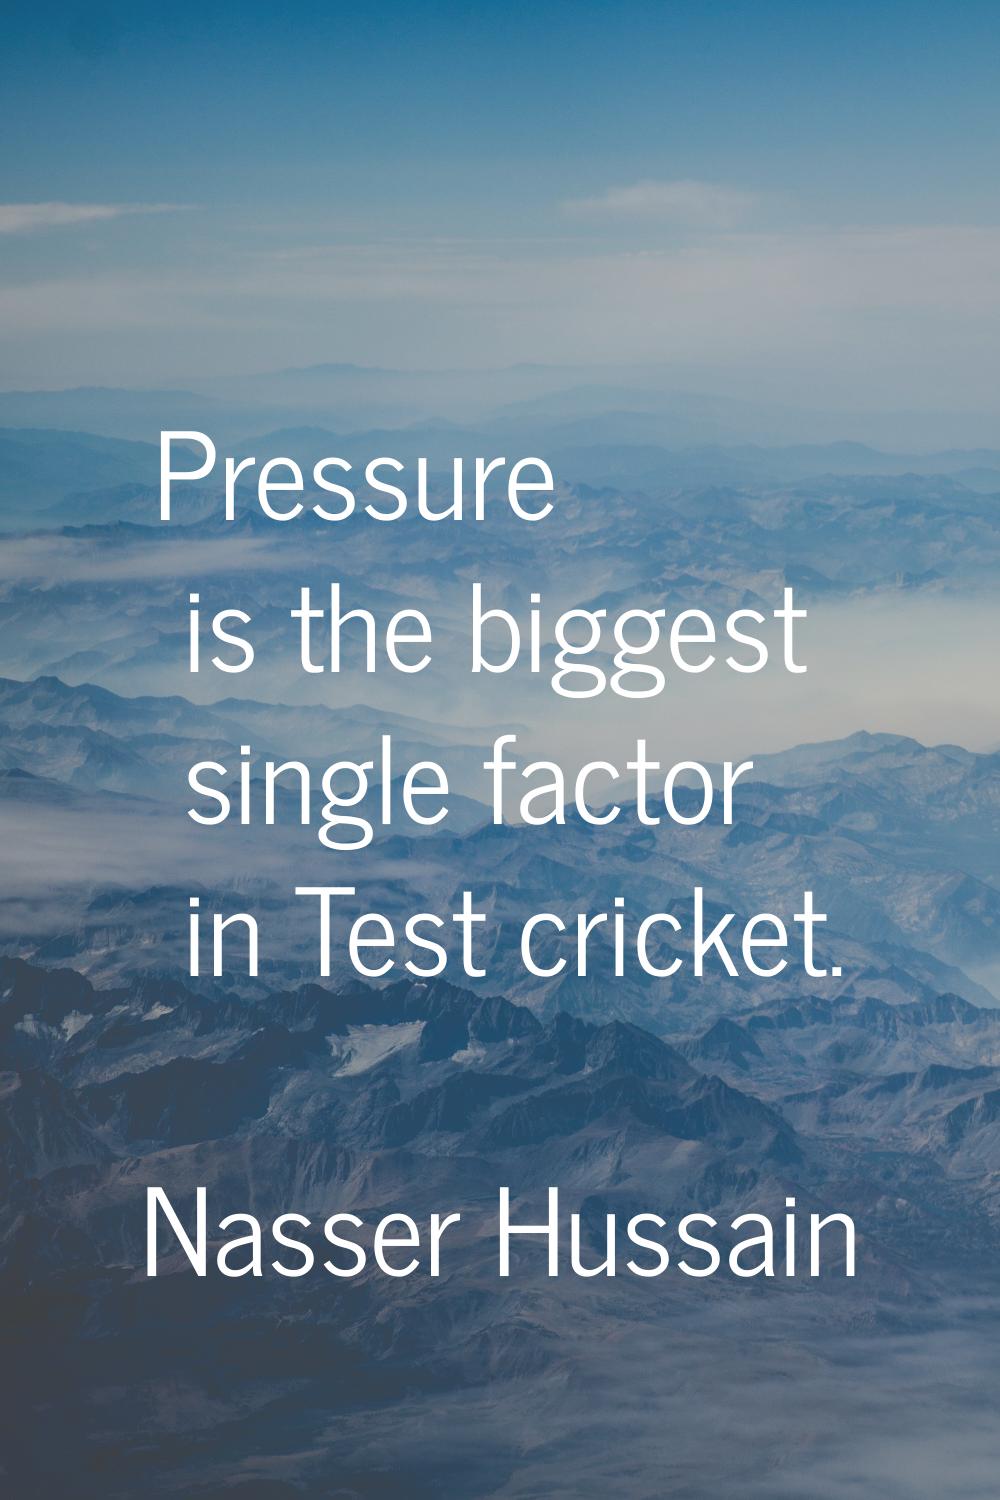 Pressure is the biggest single factor in Test cricket.